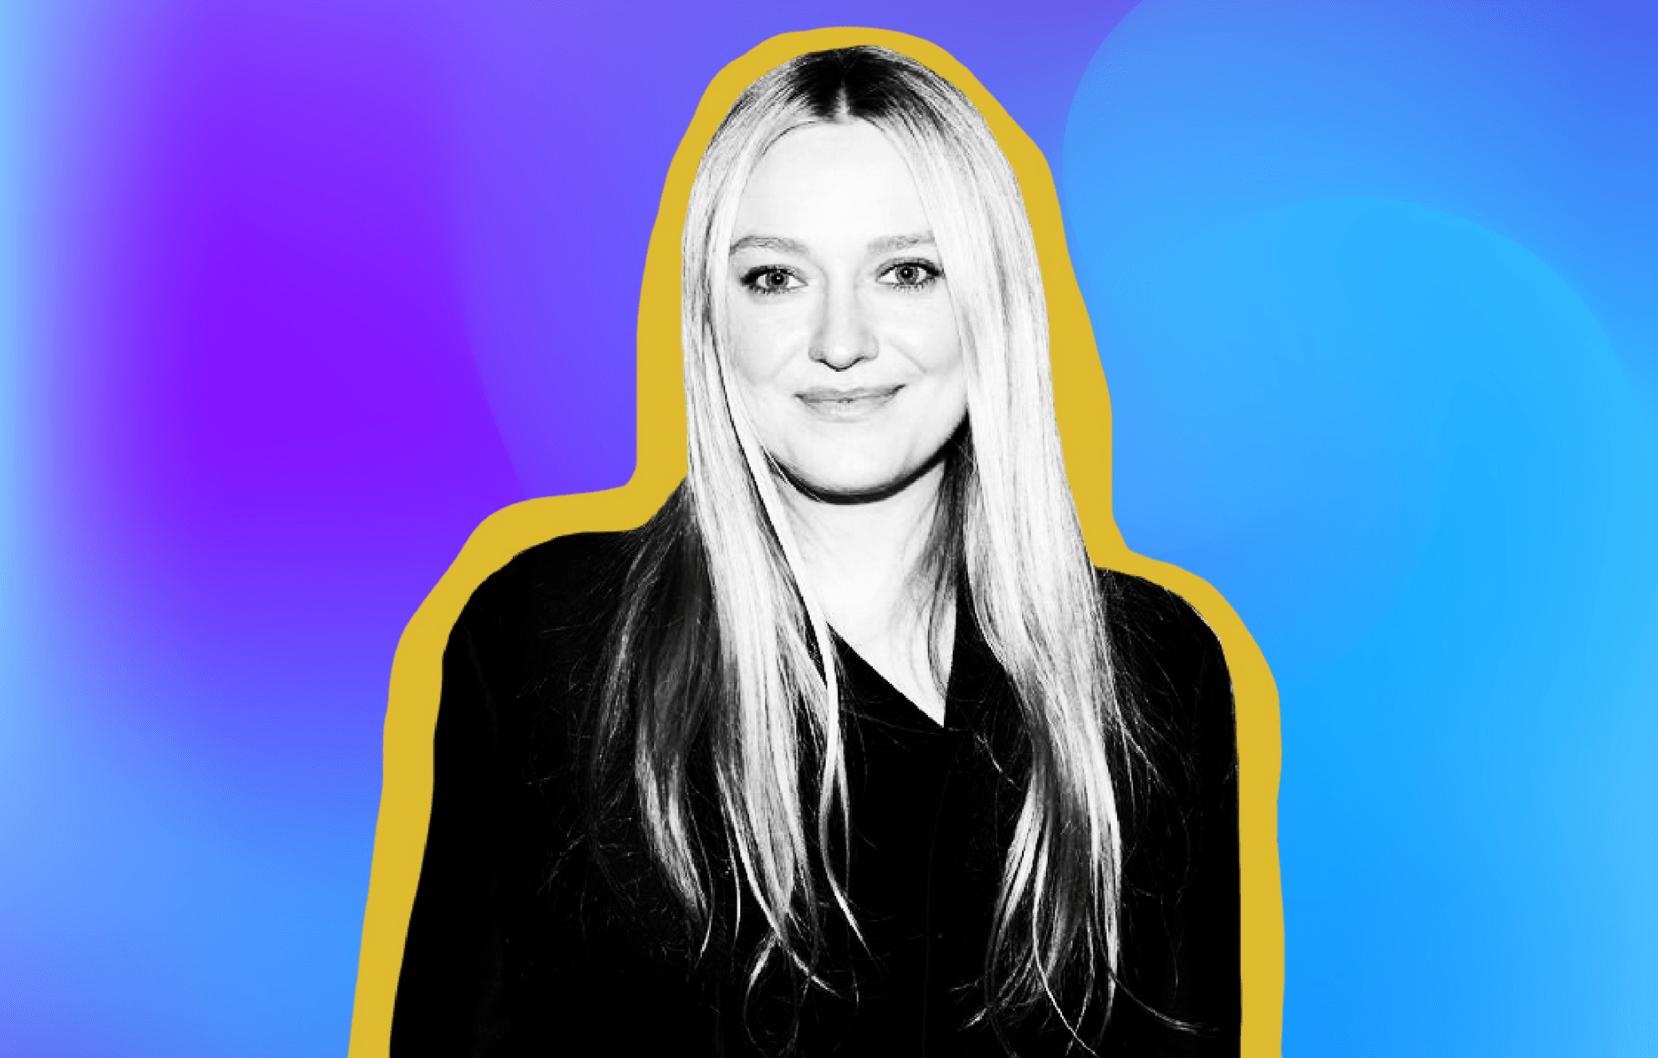 Image of Dakota Fanning with blue and yellow background